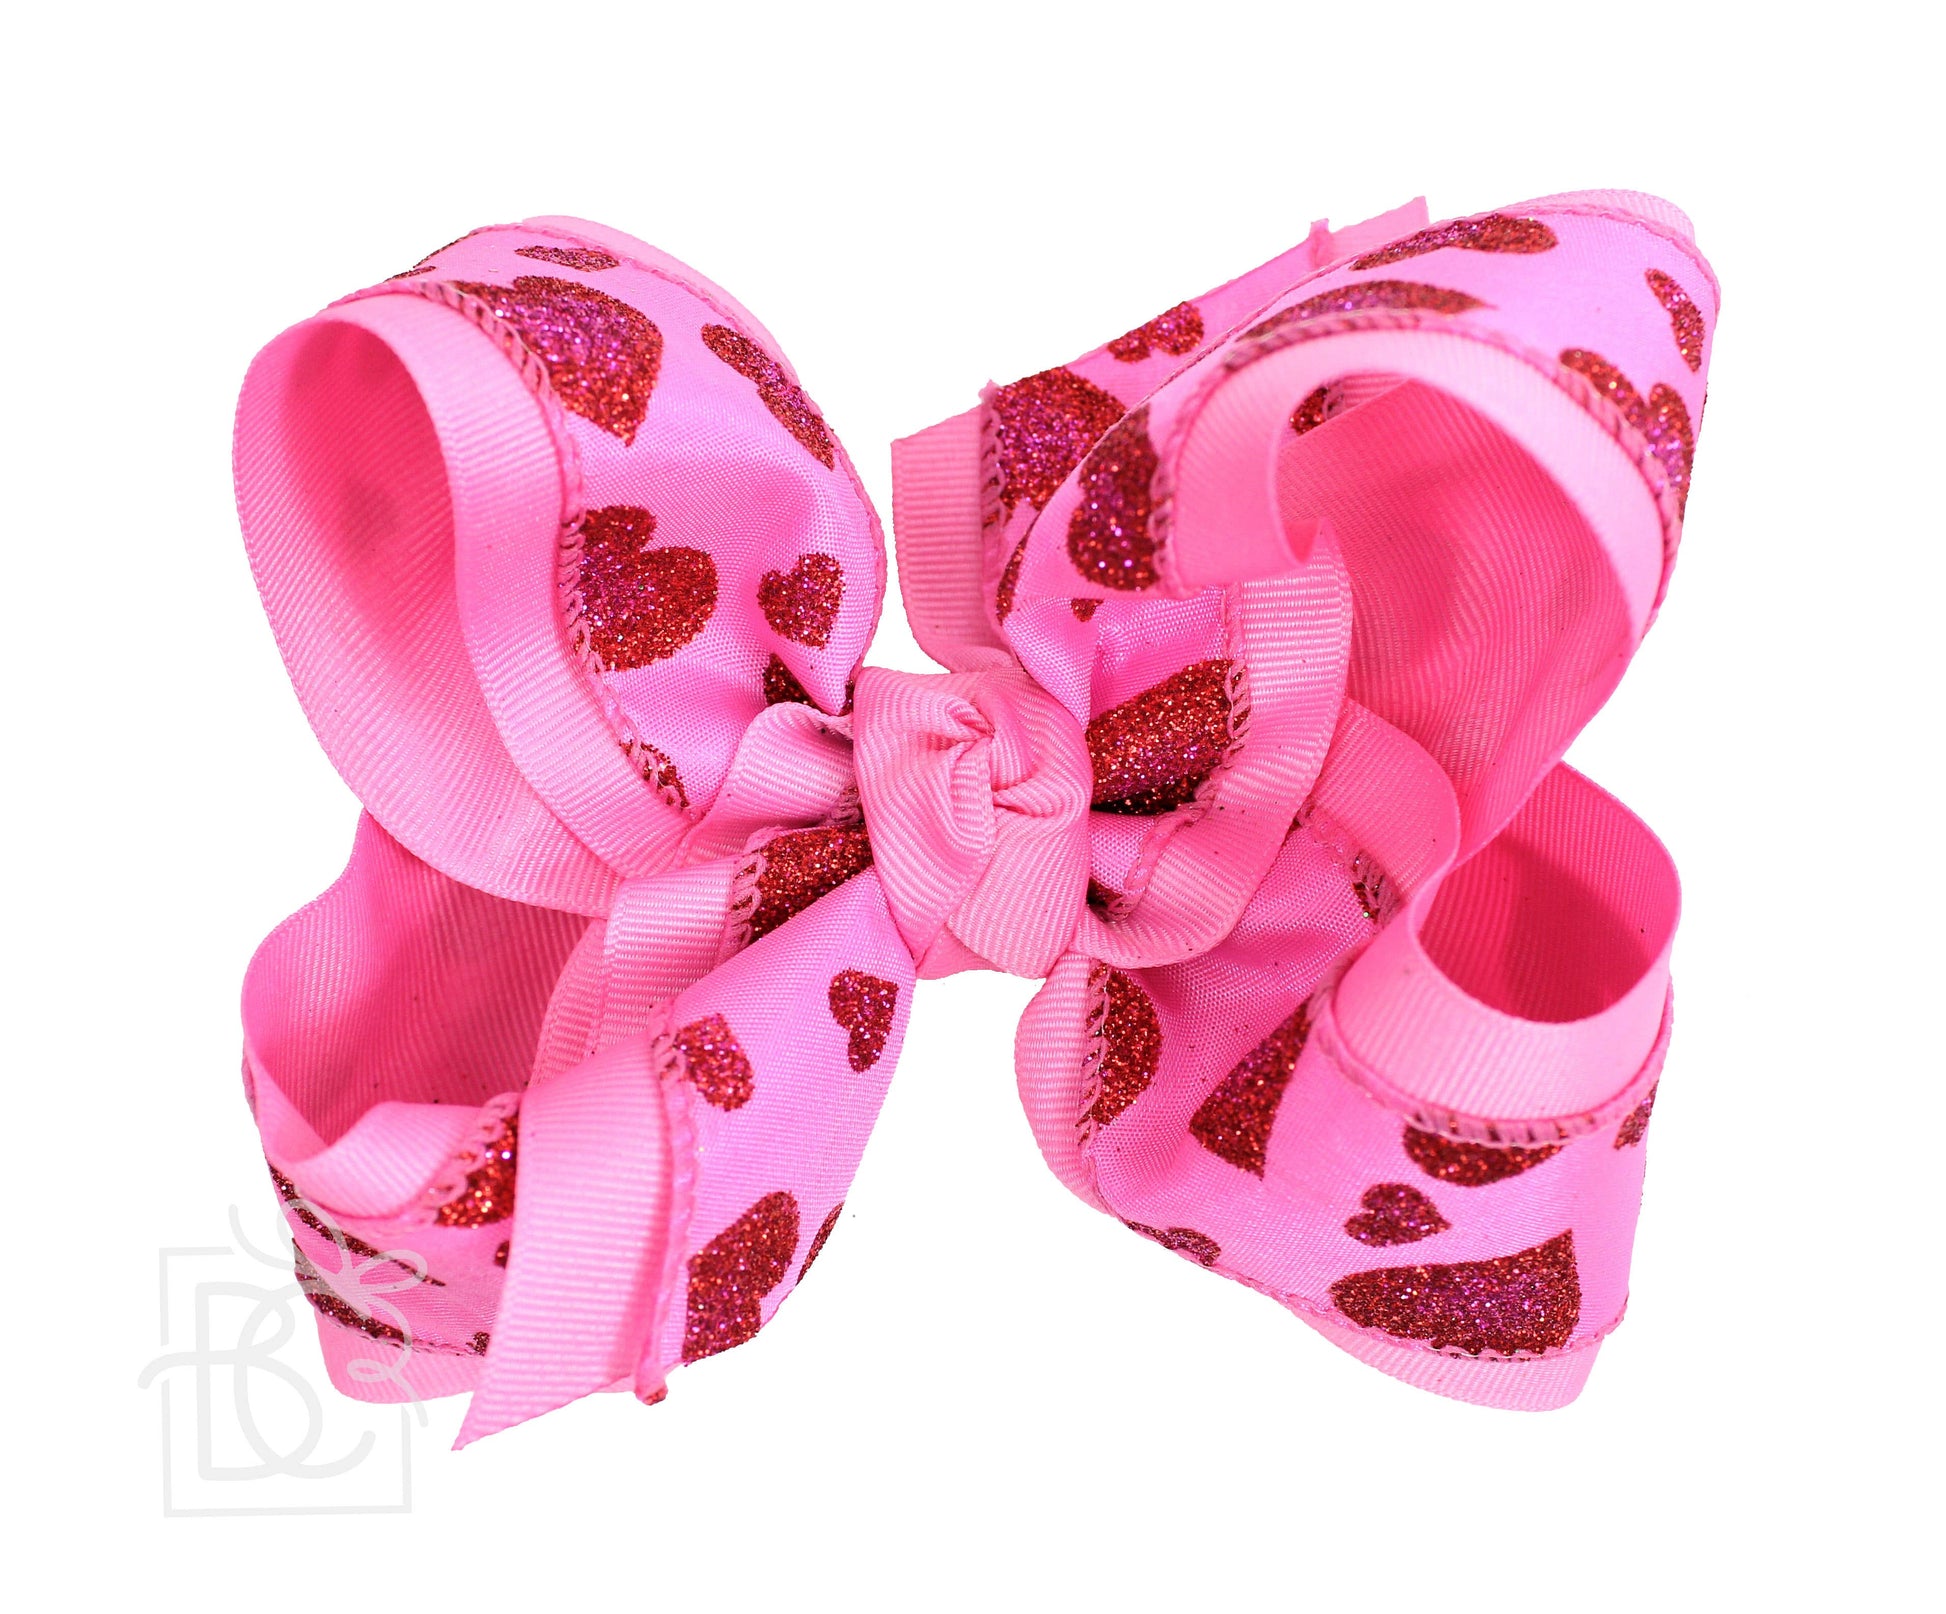 XL Glitter Heart Bow in Pink  - Doodlebug's Children's Boutique